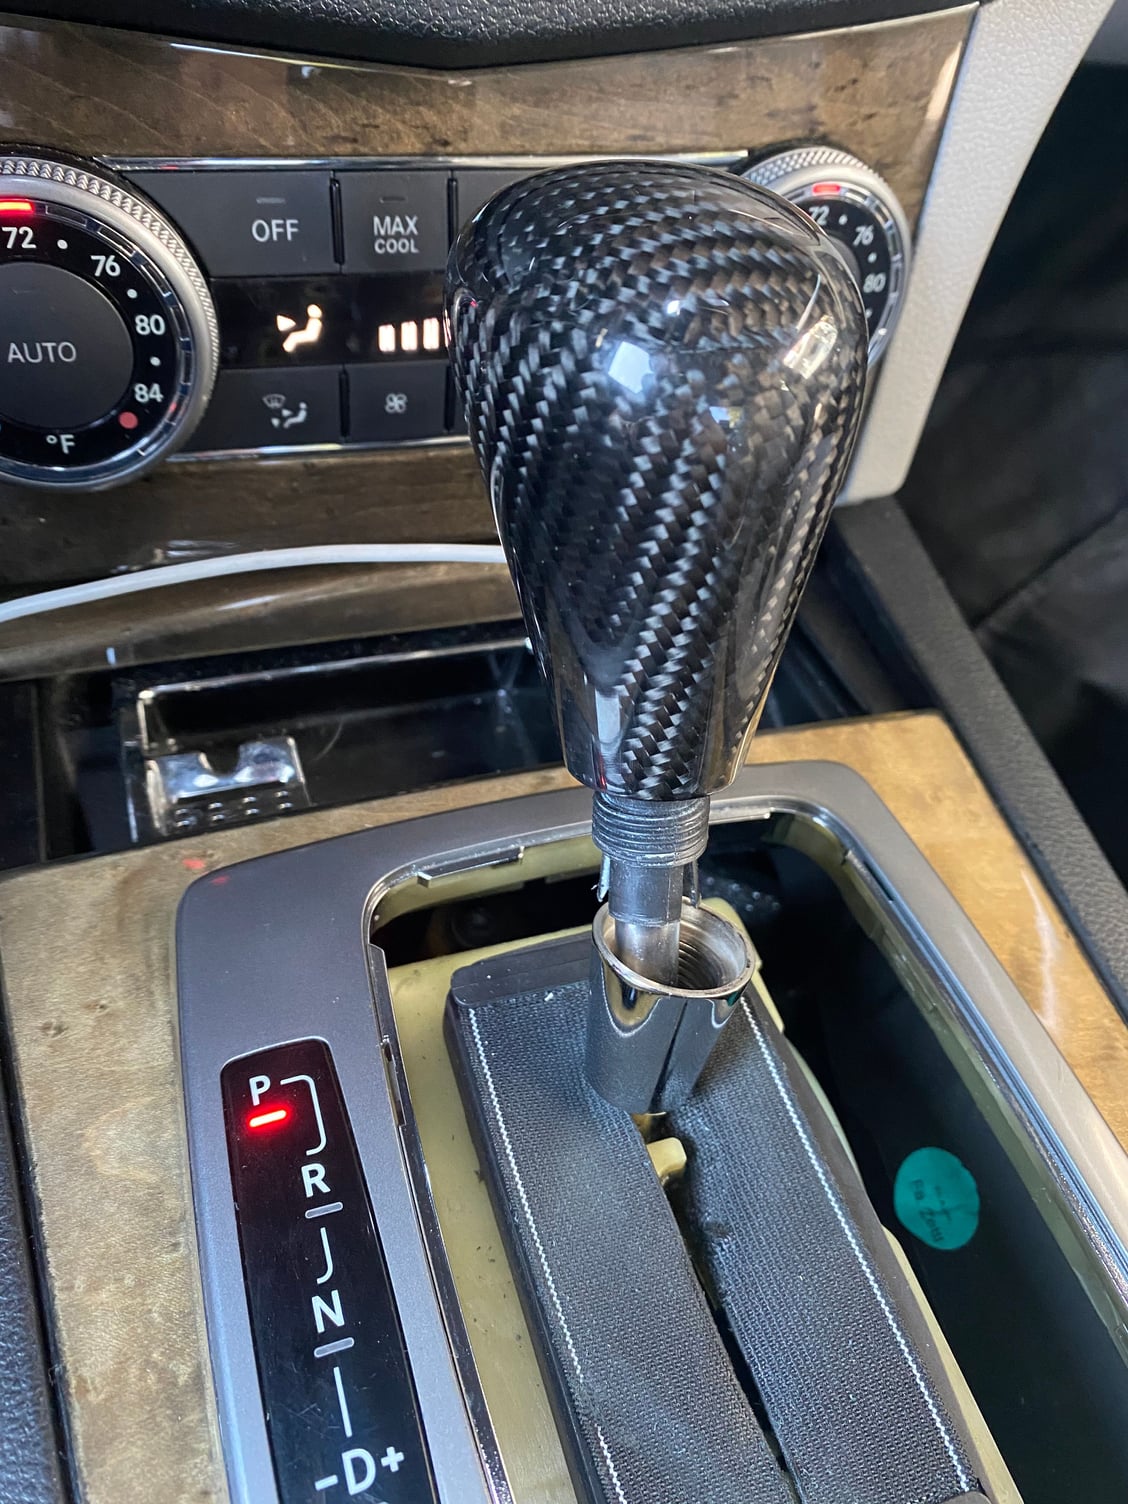 How to Remove Shift Knob in W204? - Page 4 -  Forums